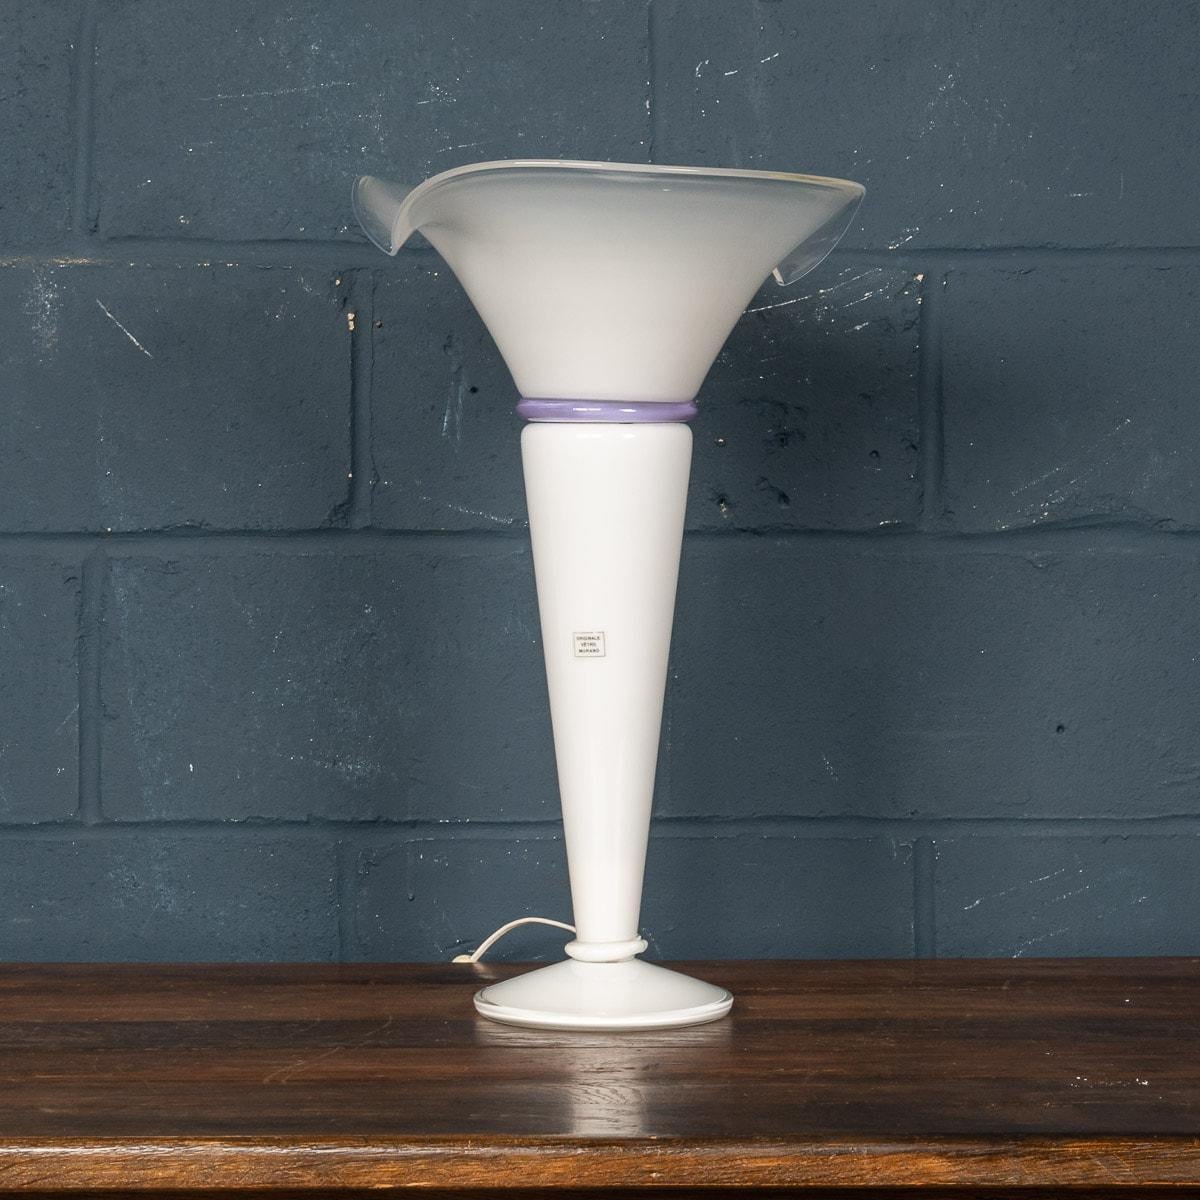 A stunning tulip-form table lamp made in Italy in the latter part of the 20th century. This lamp would have been hand blown by the famous glass makers on the island of Murano in Venice, Italy. It demonstrates the exceptional skill and craftsmanship